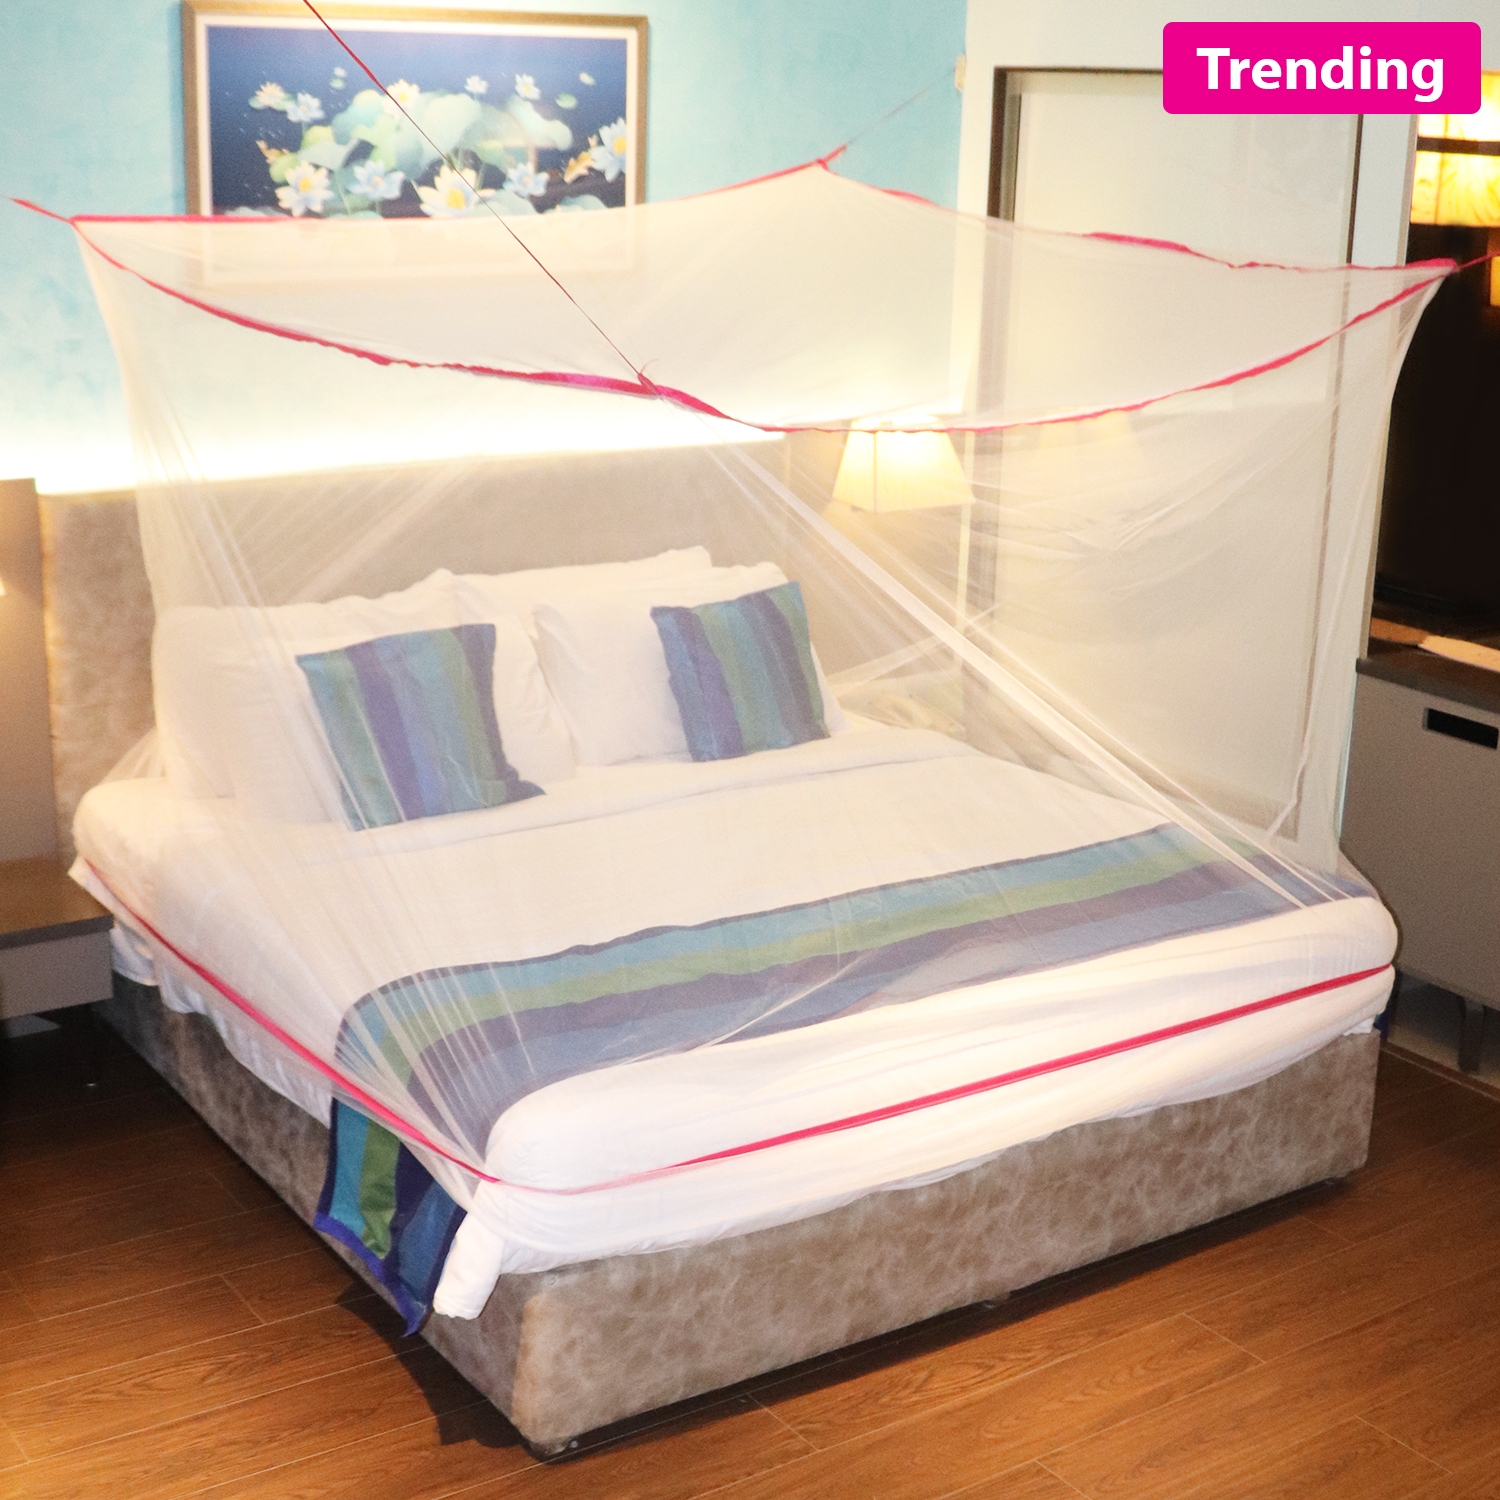 SILVER SHINE | Mosquito Net for Double Bed, King-Size, Square Hanging Foldable Polyester Net White And Pink 3